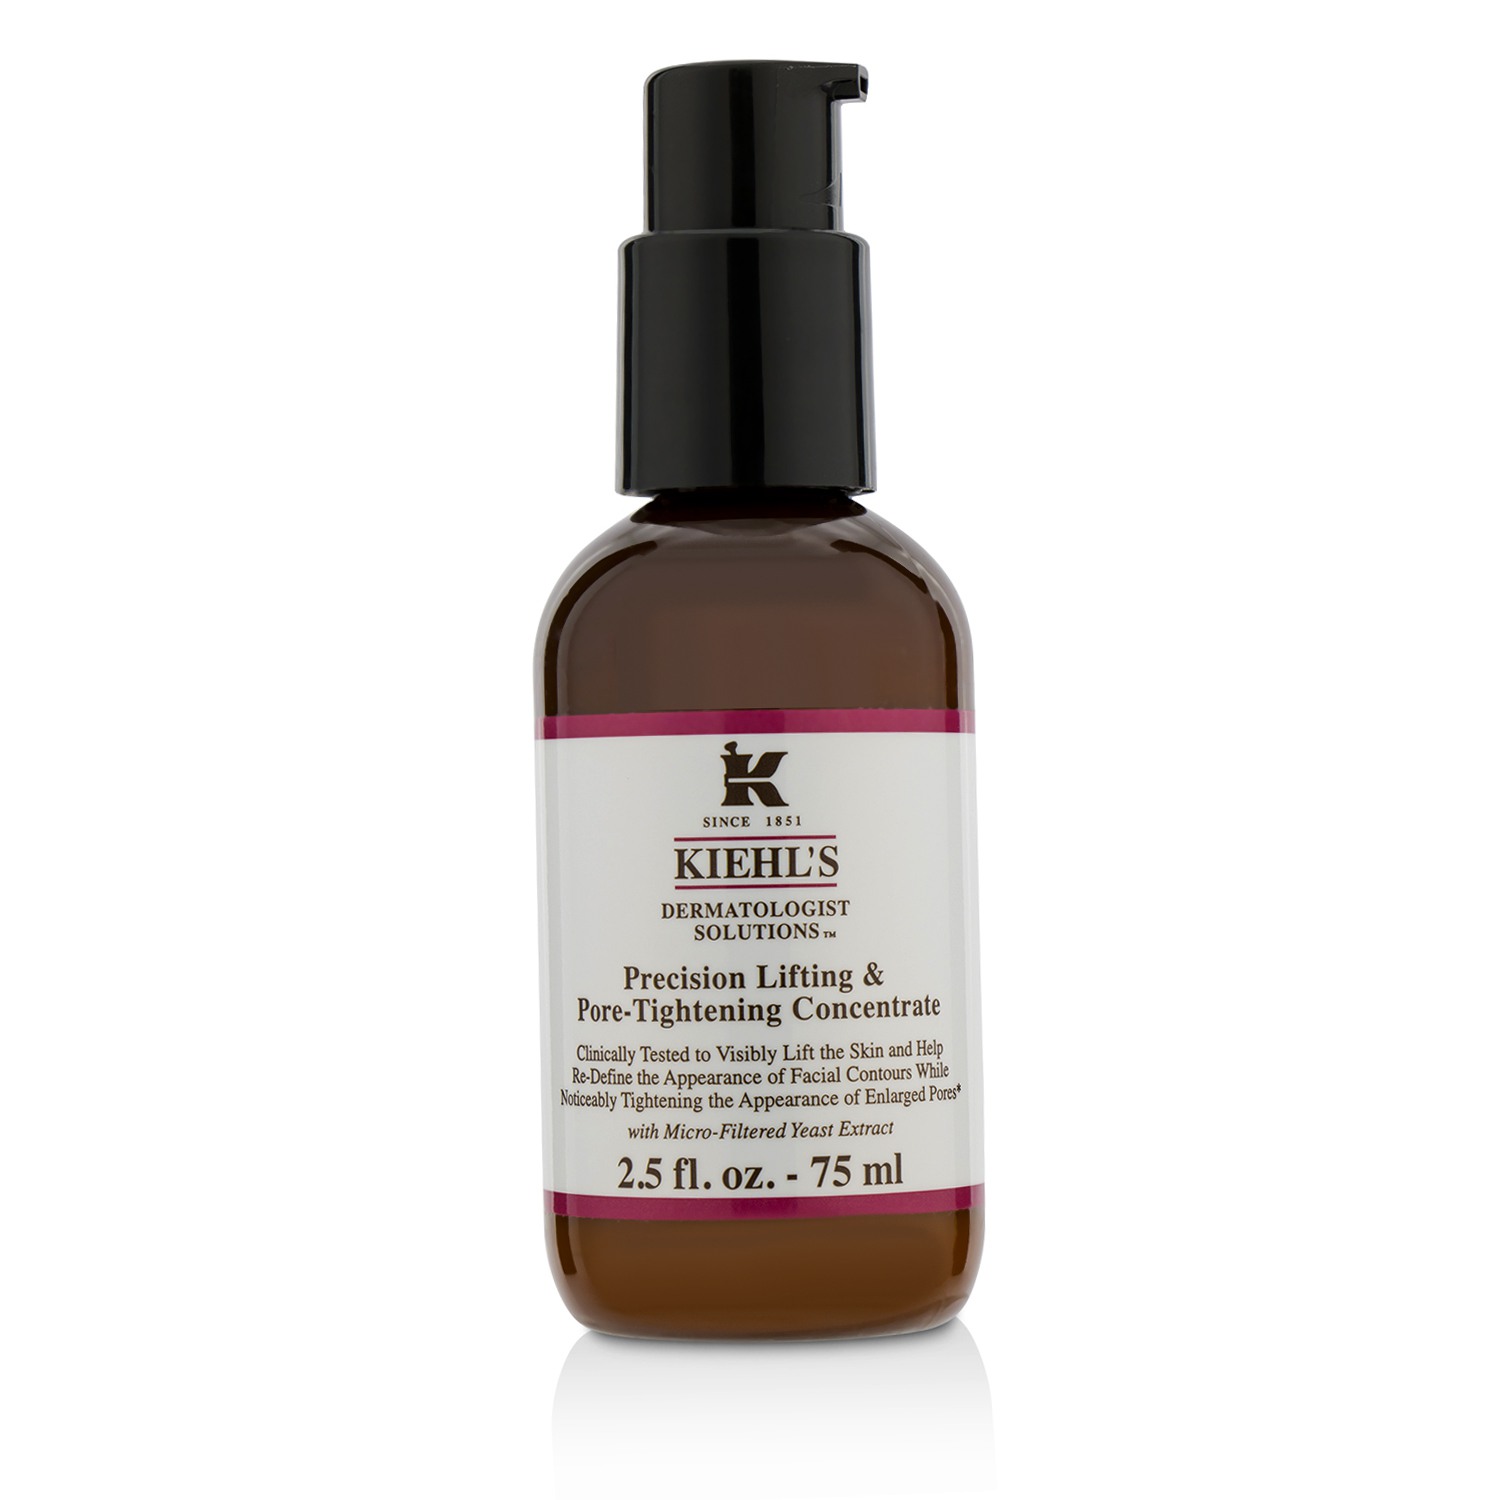 Dermatologist Solutions Precision Lifting & Pore-Tightening Concentrate (Unboxed) Kiehls Image